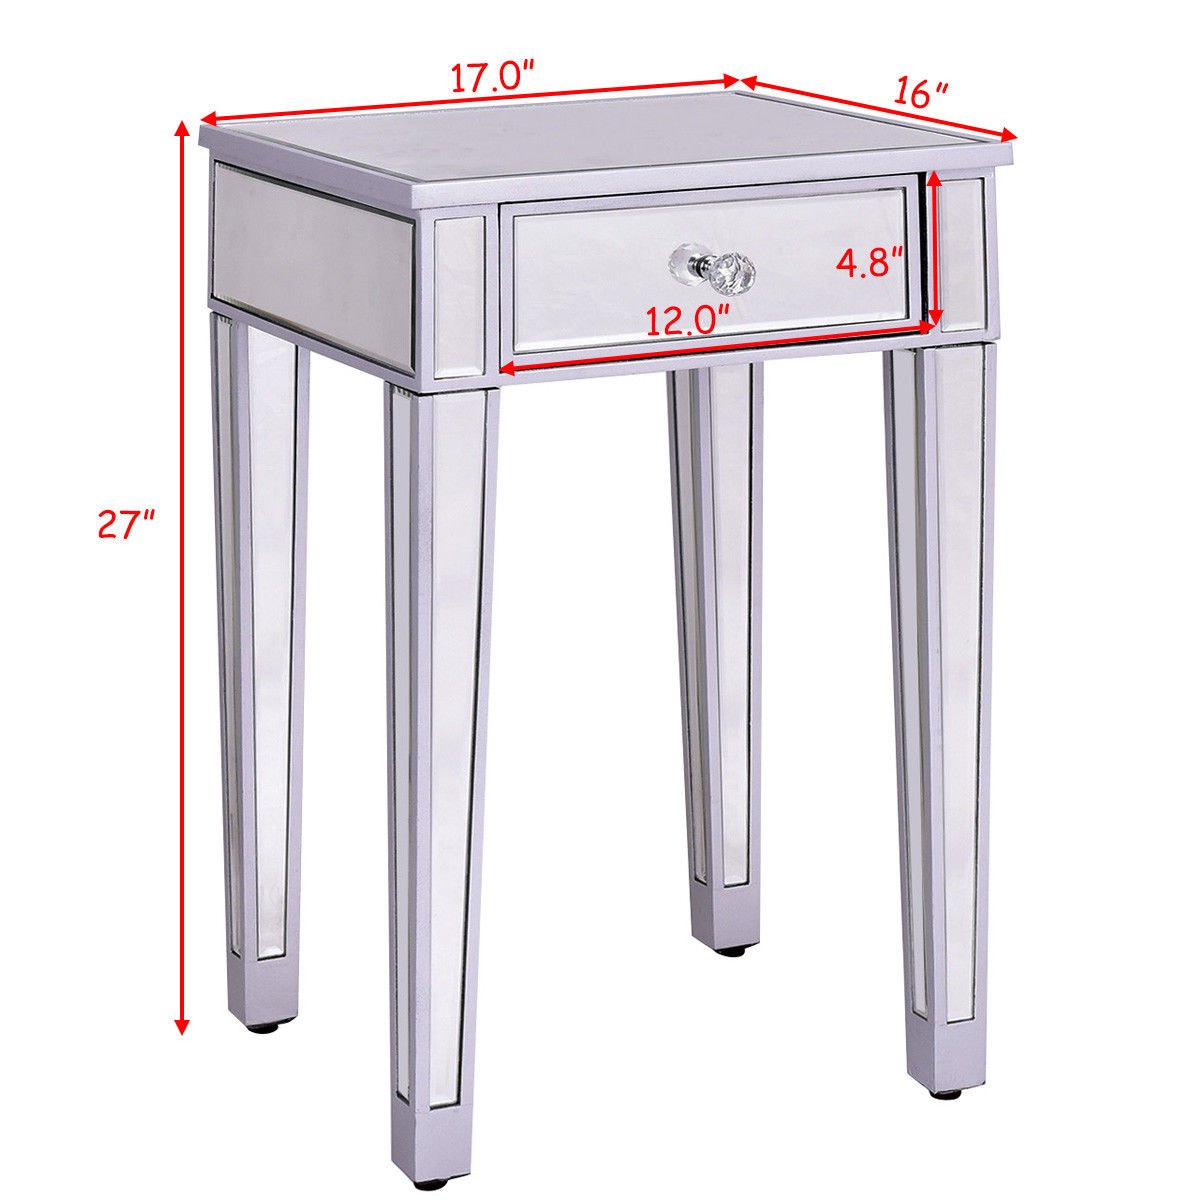 way mirrored accent table nightstand end bedside metal with drawers storage cabinet drawer leick furniture corner desk pottery barn rattan coffee pier candles square marble dining